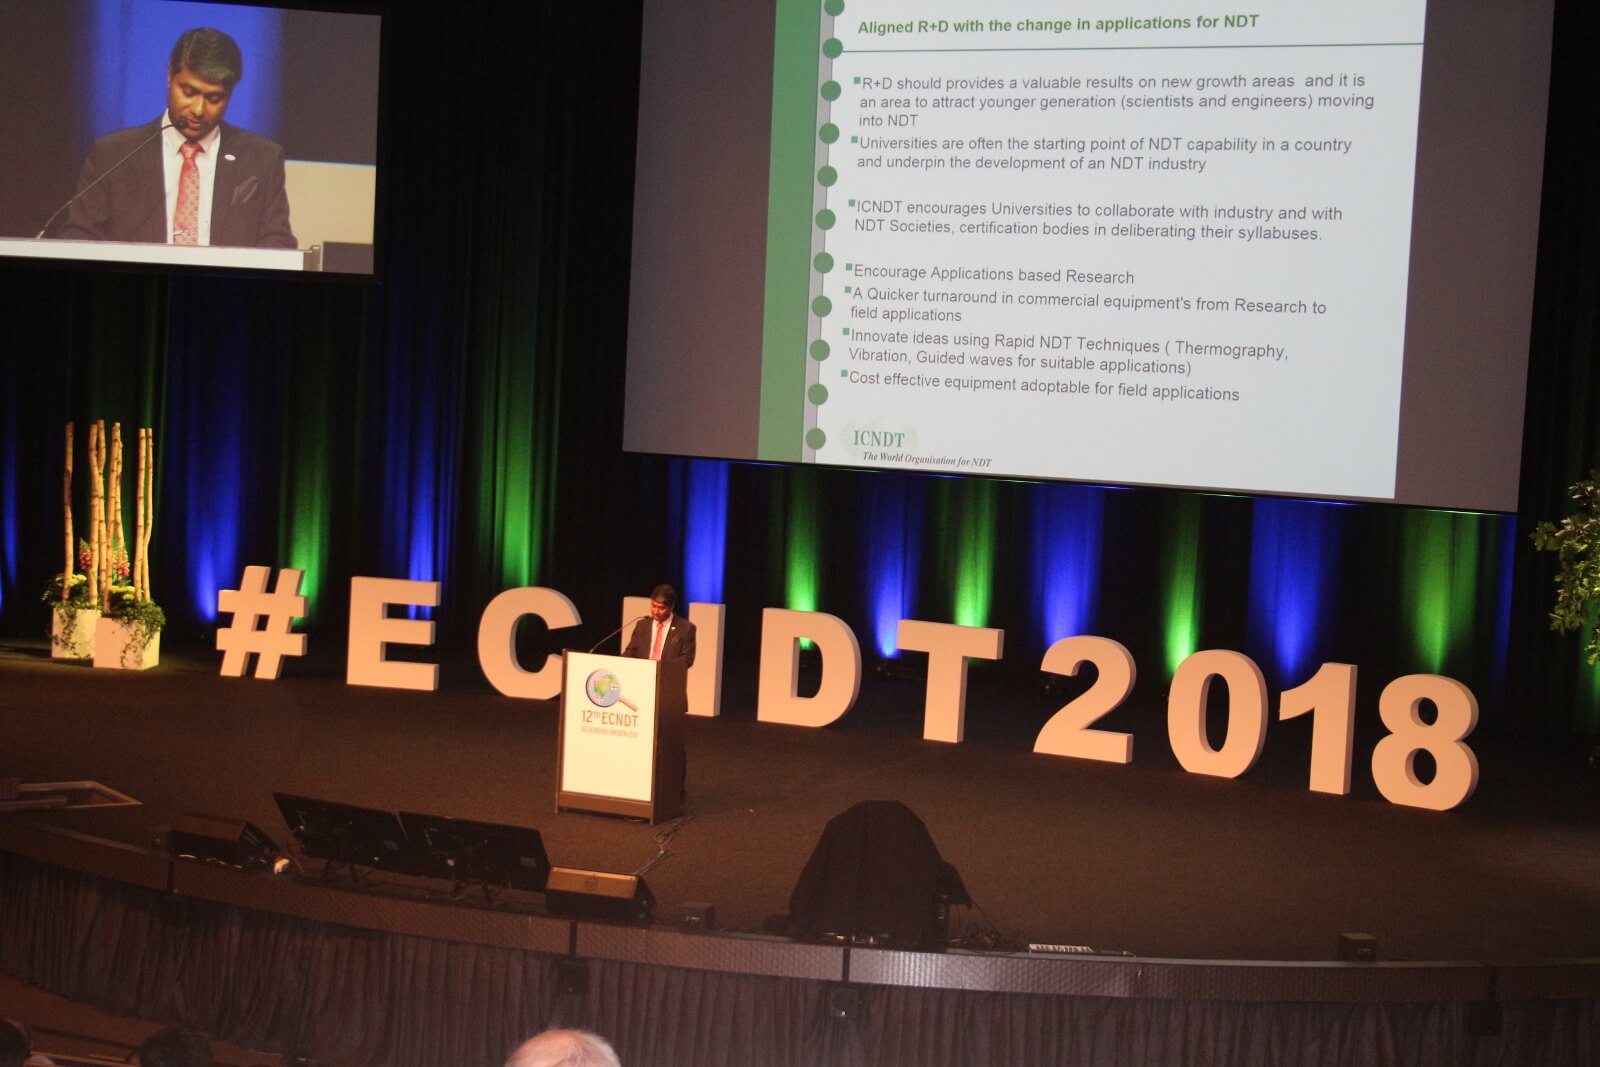 European conference of NDT 2018 (ECNDT) opening ceremony